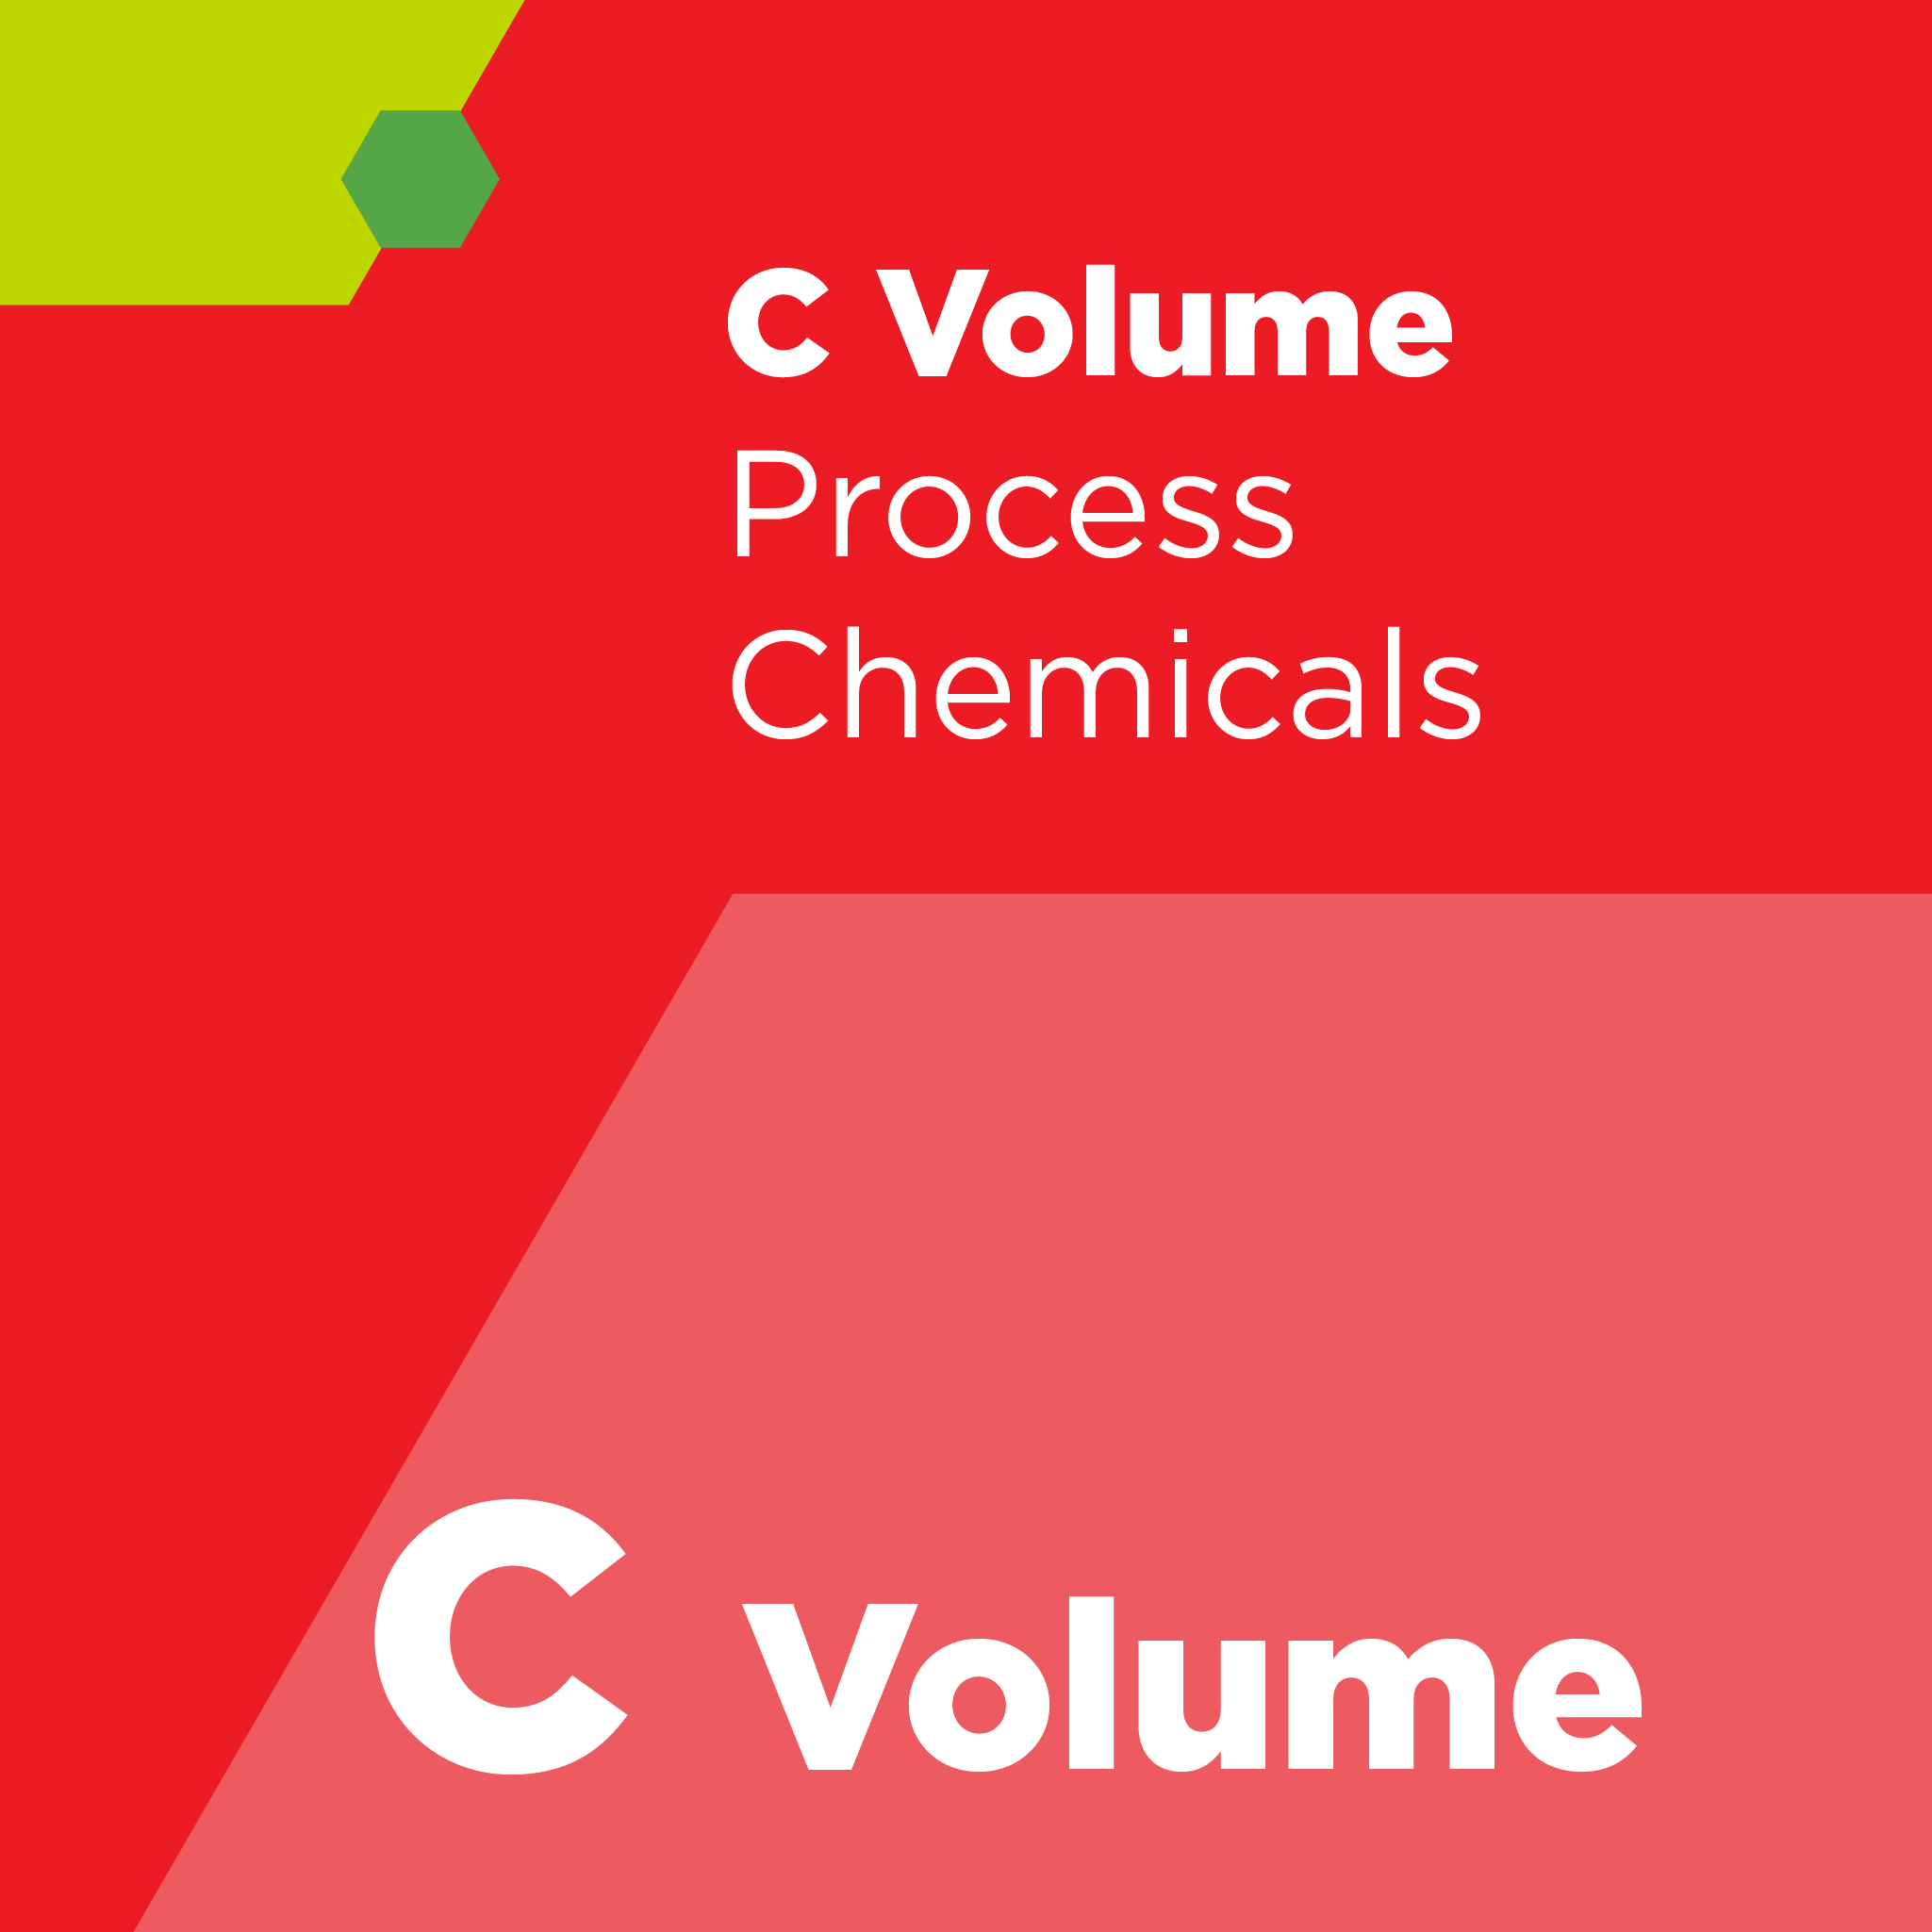 C00100 - SEMI C1 - Guide for the Analysis of Liquid Chemicals